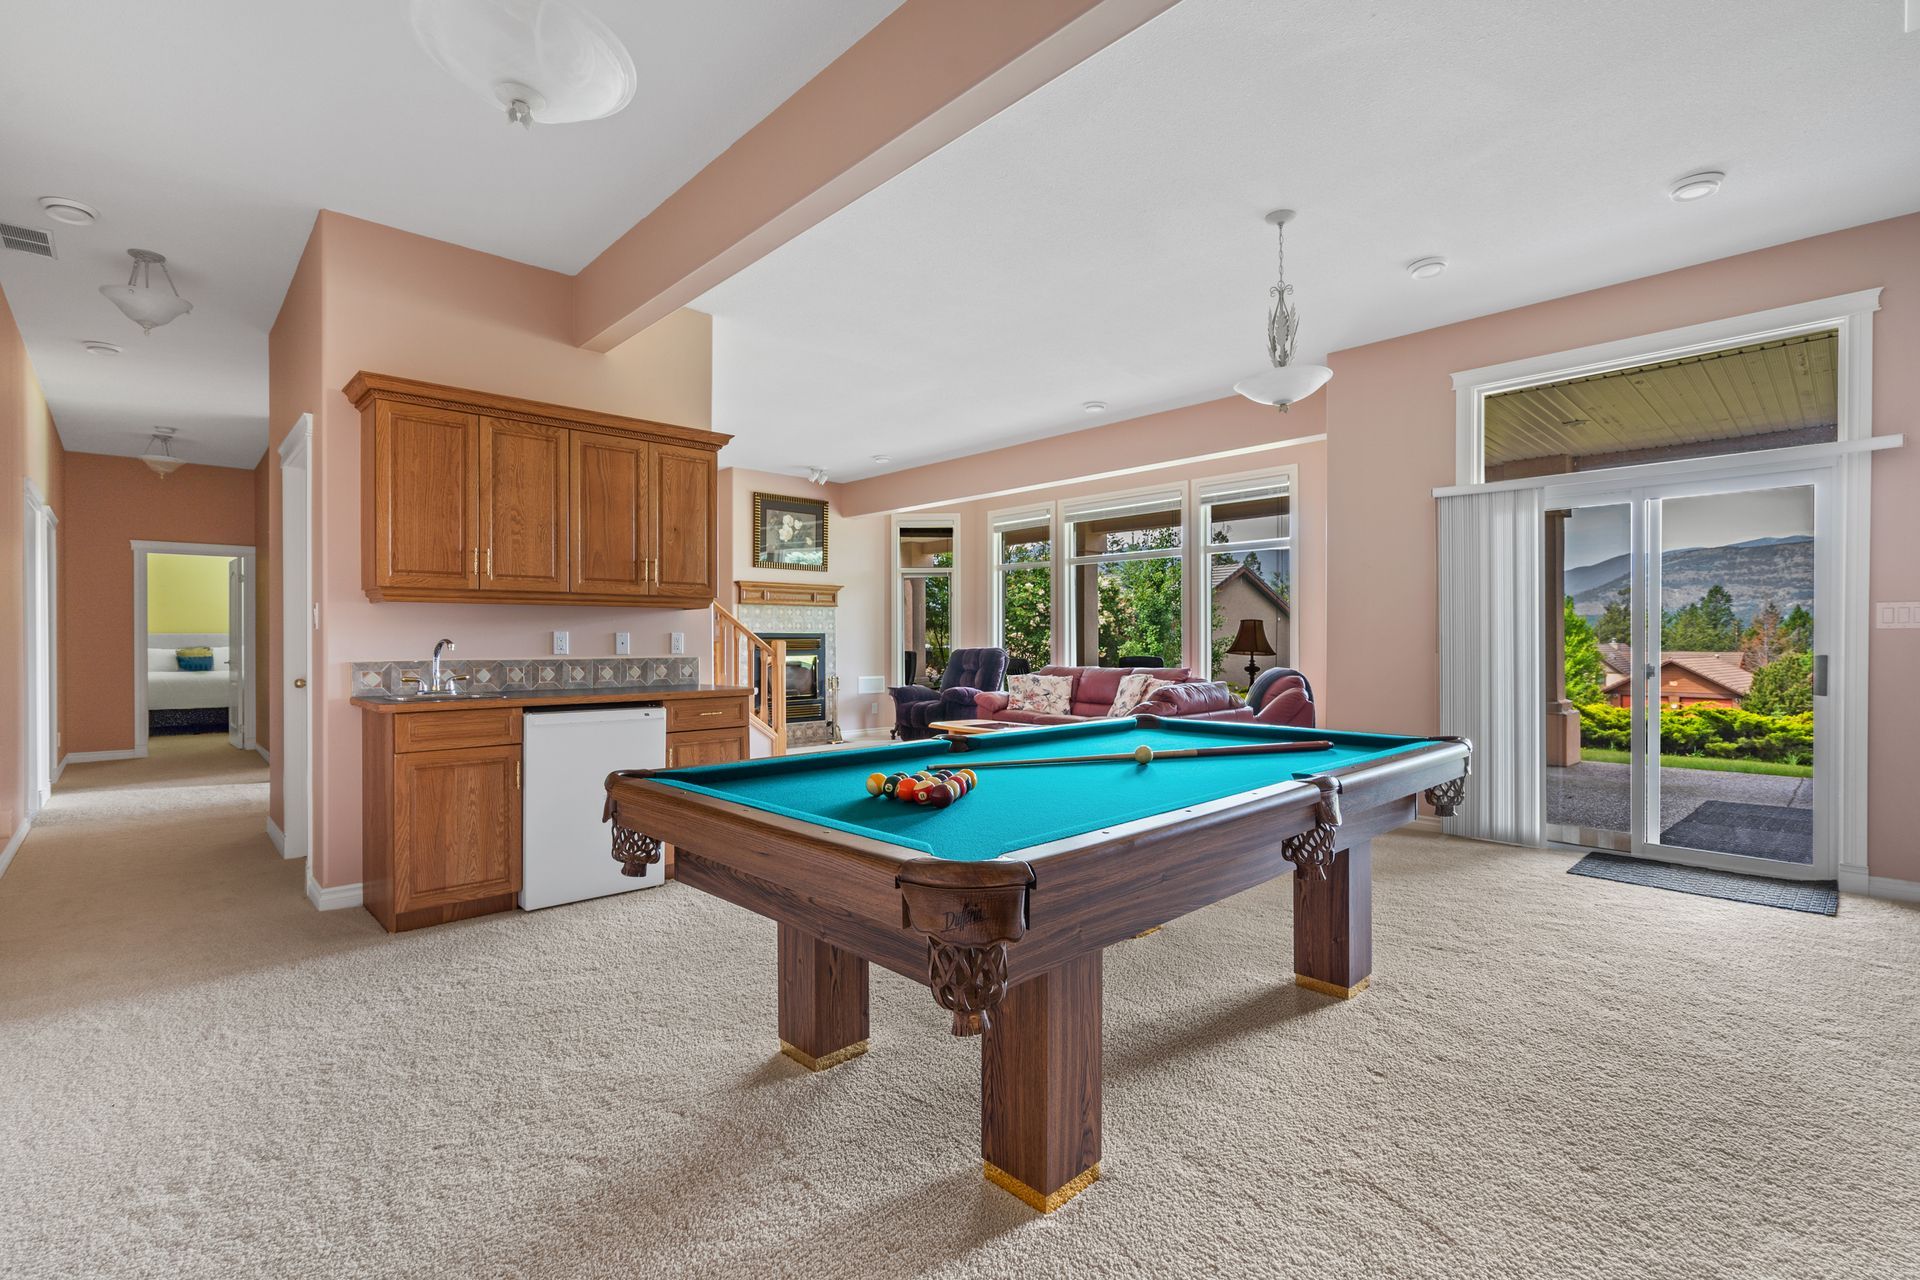 Pool table of the Mountain Top, a Fairmont Hot Springs BC Vacation Rental hosted by Aisling Baile Property Management.